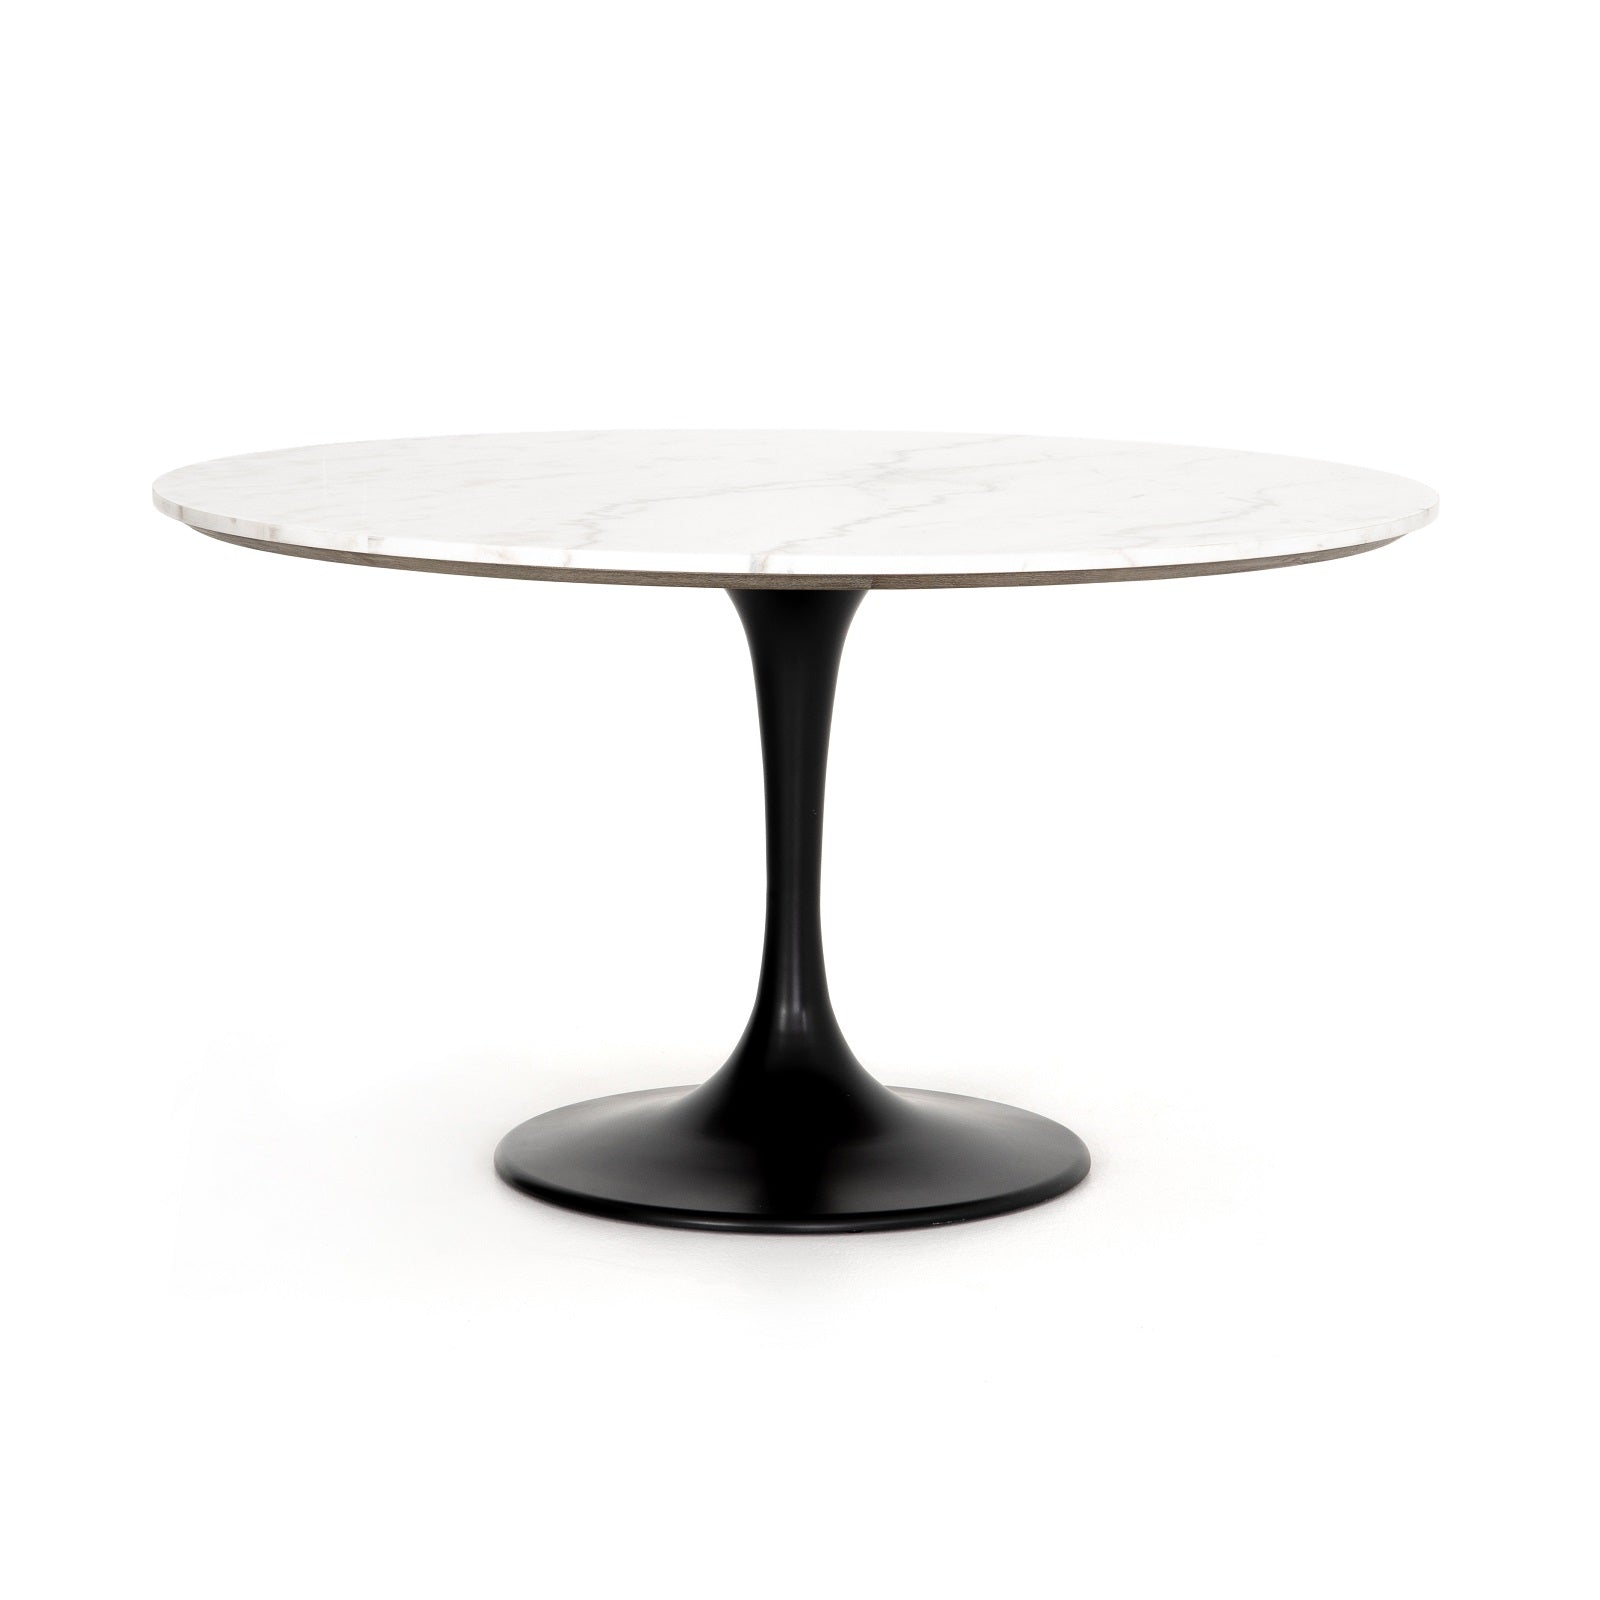 tulip table with white top and black base in larger size